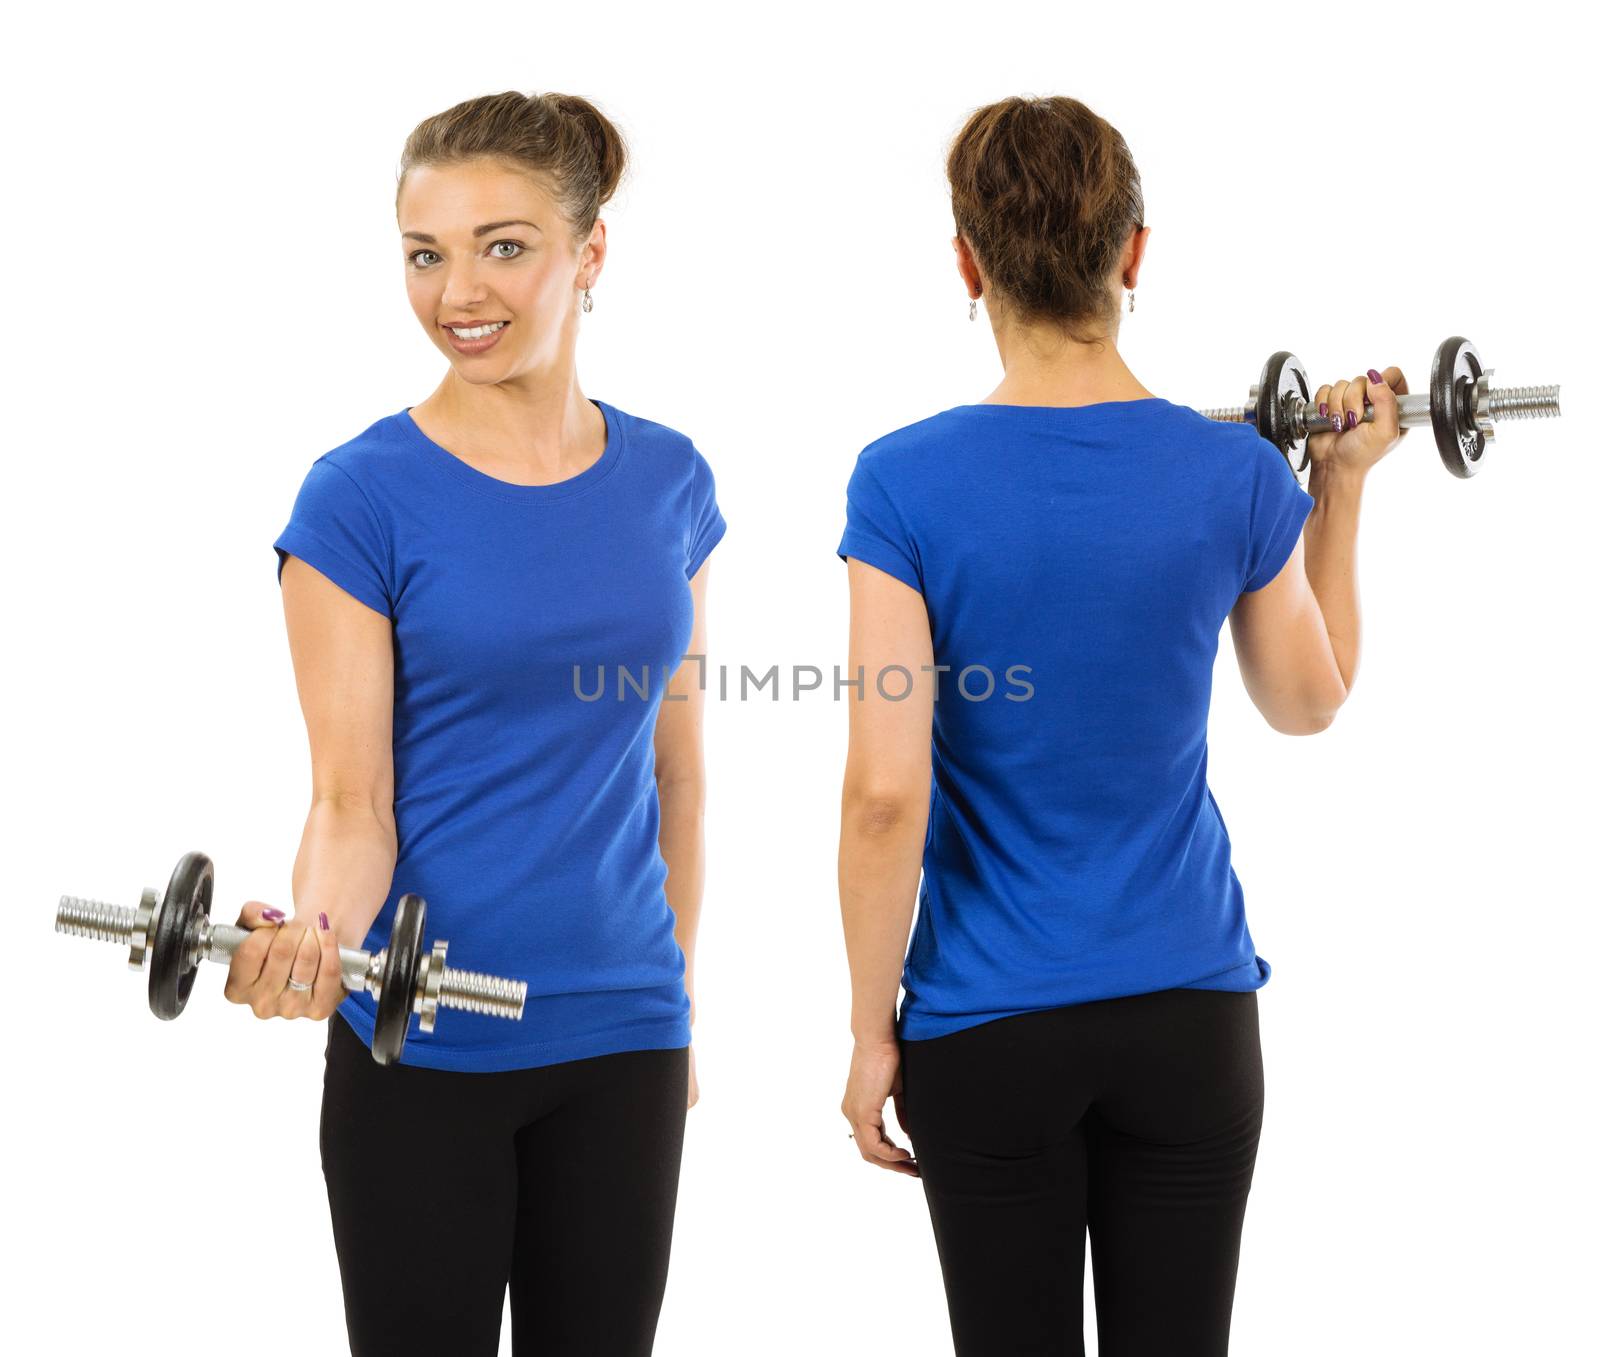 Slim woman wearing blank blue shirt and exercising
 by sumners